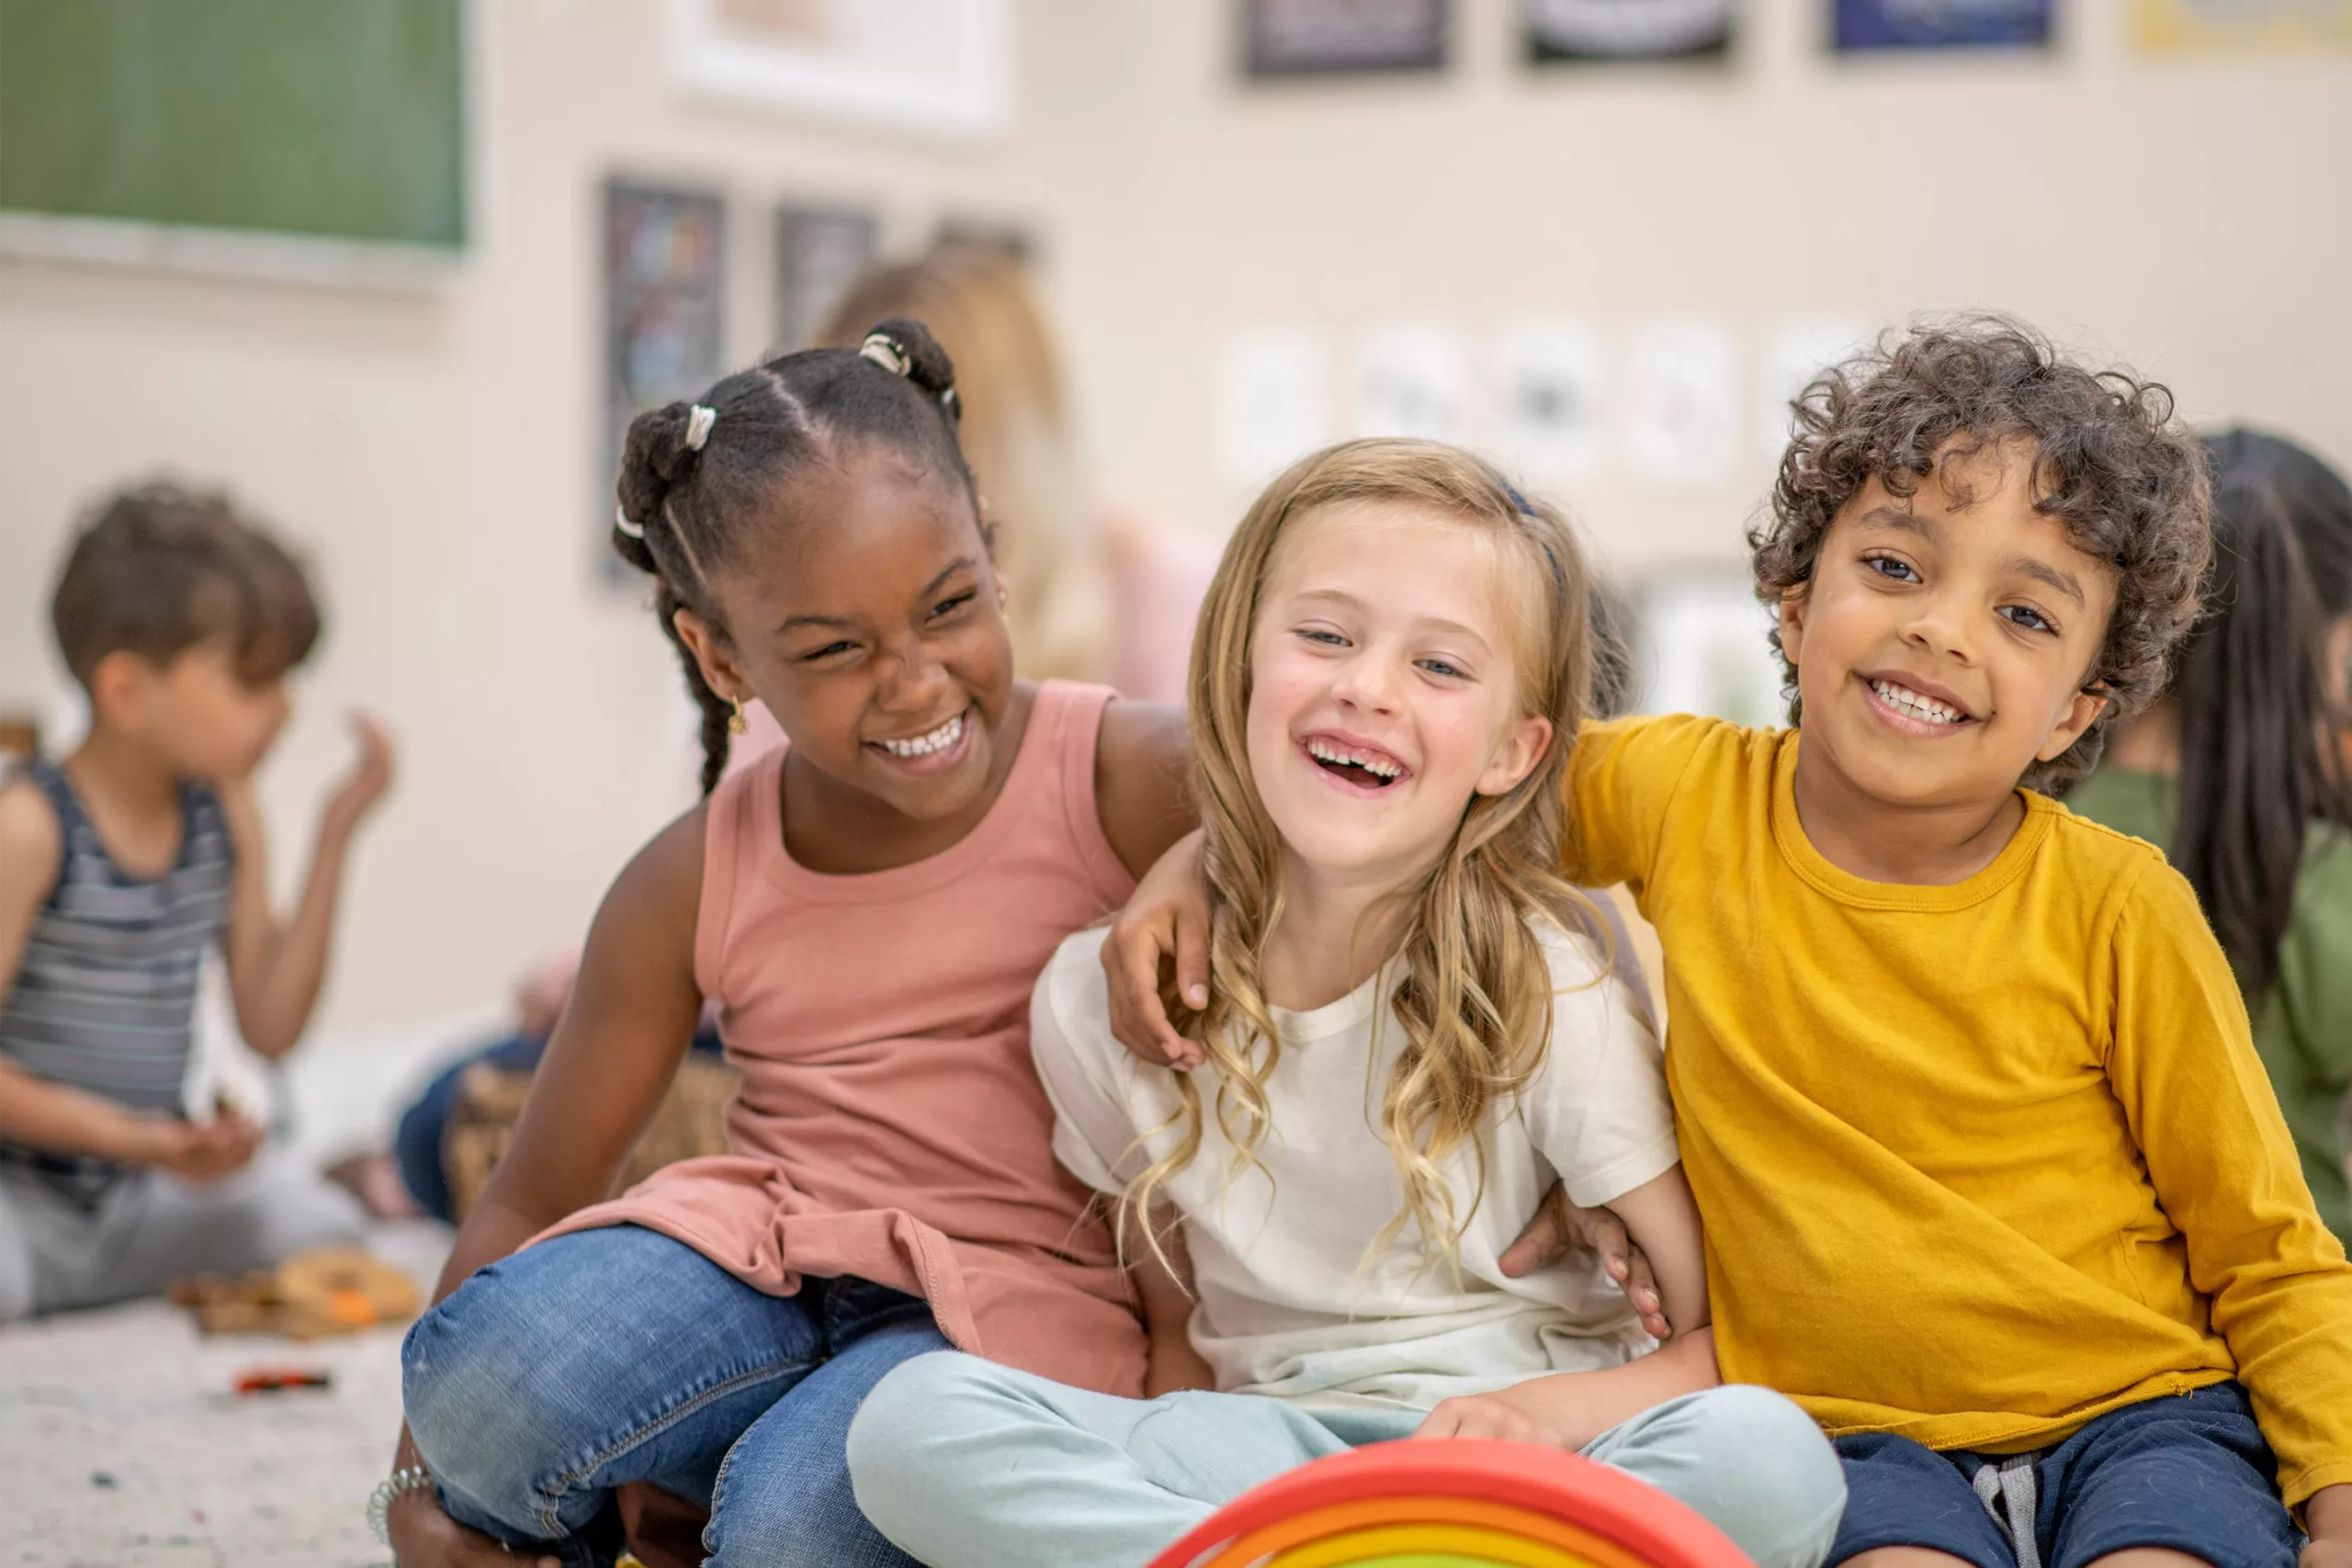 Three children sit in a colorful room. They have their arms around one another and are smiling.